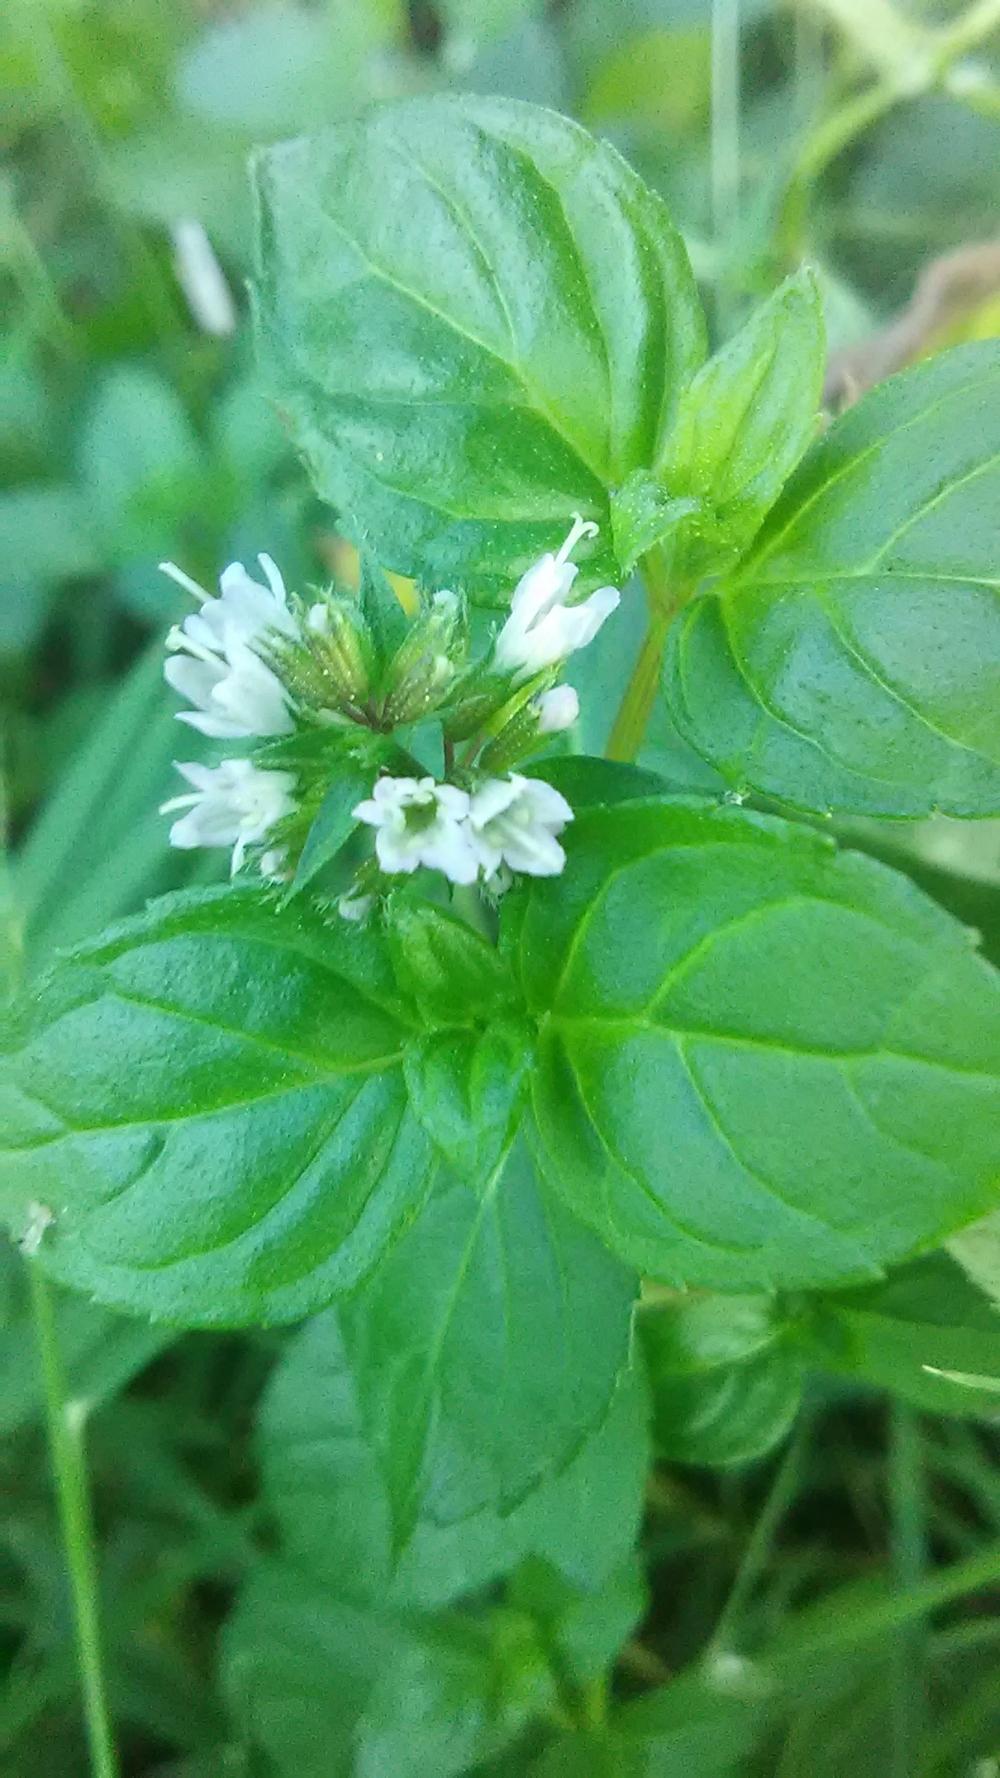 Photo of Chocolate Mint (Mentha x piperita 'Chocolate') uploaded by alex1992ccc